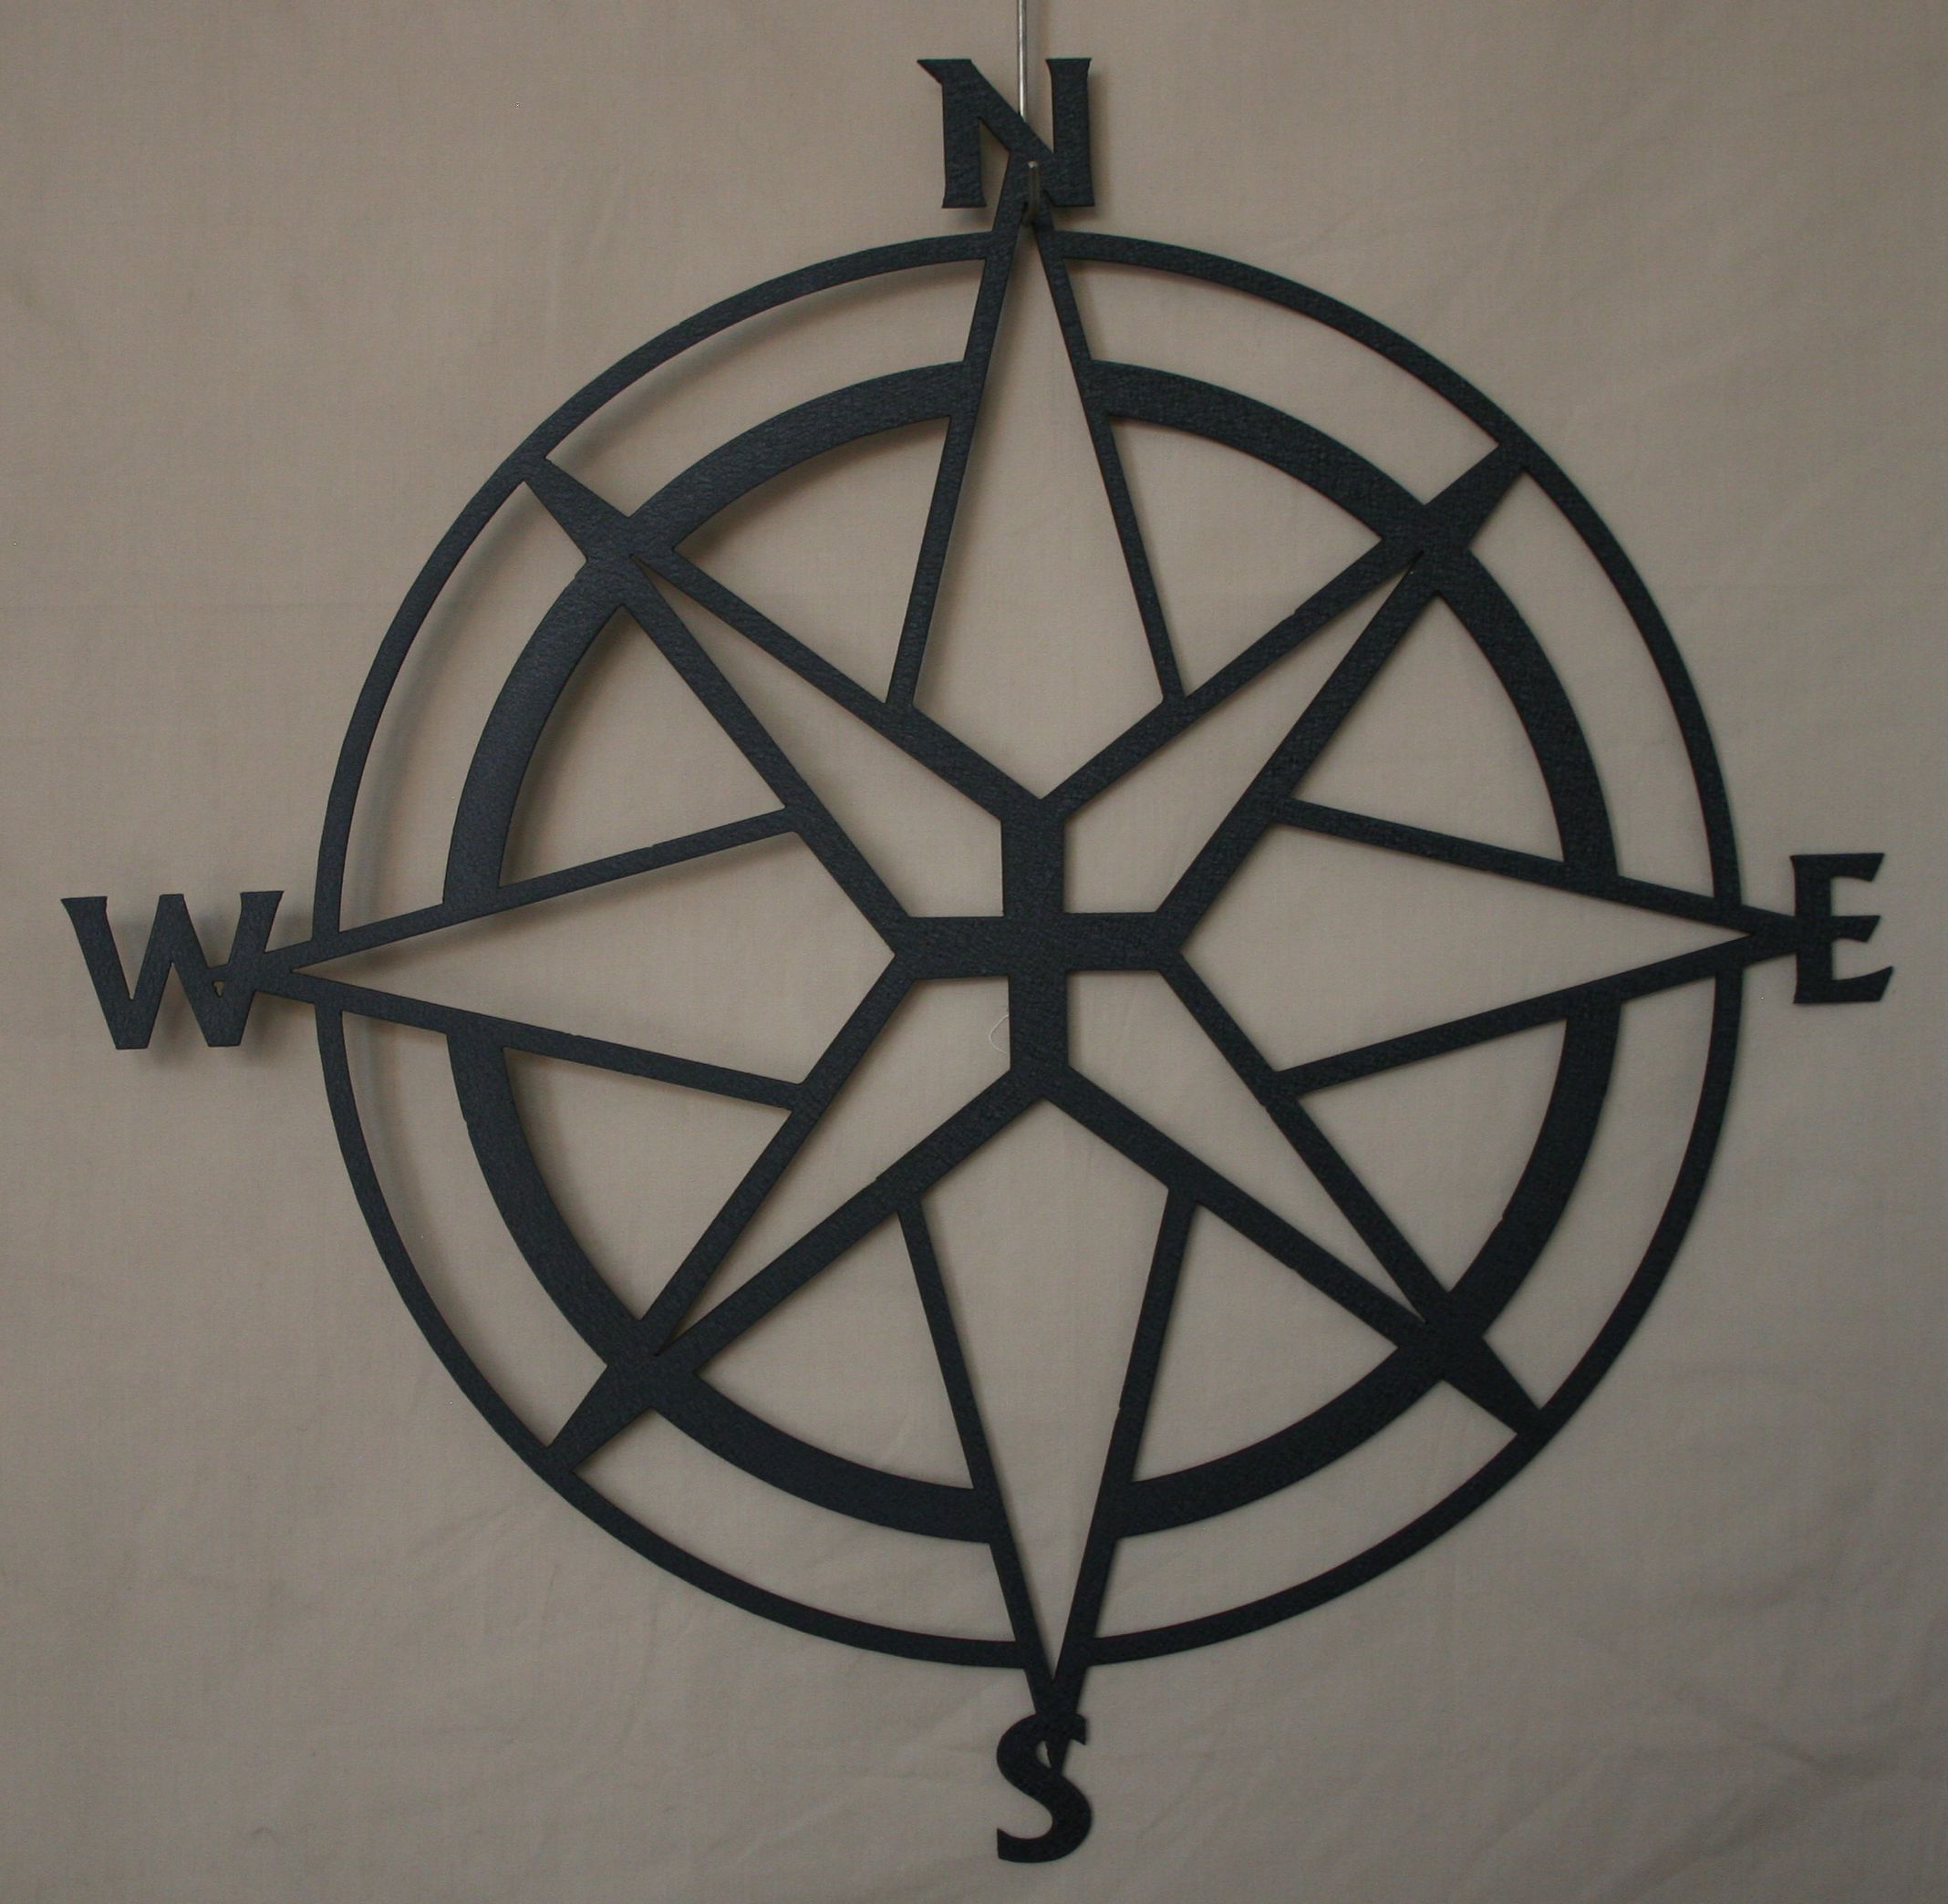 Wall Metal Art, North, South, East, West, Compass, Direction